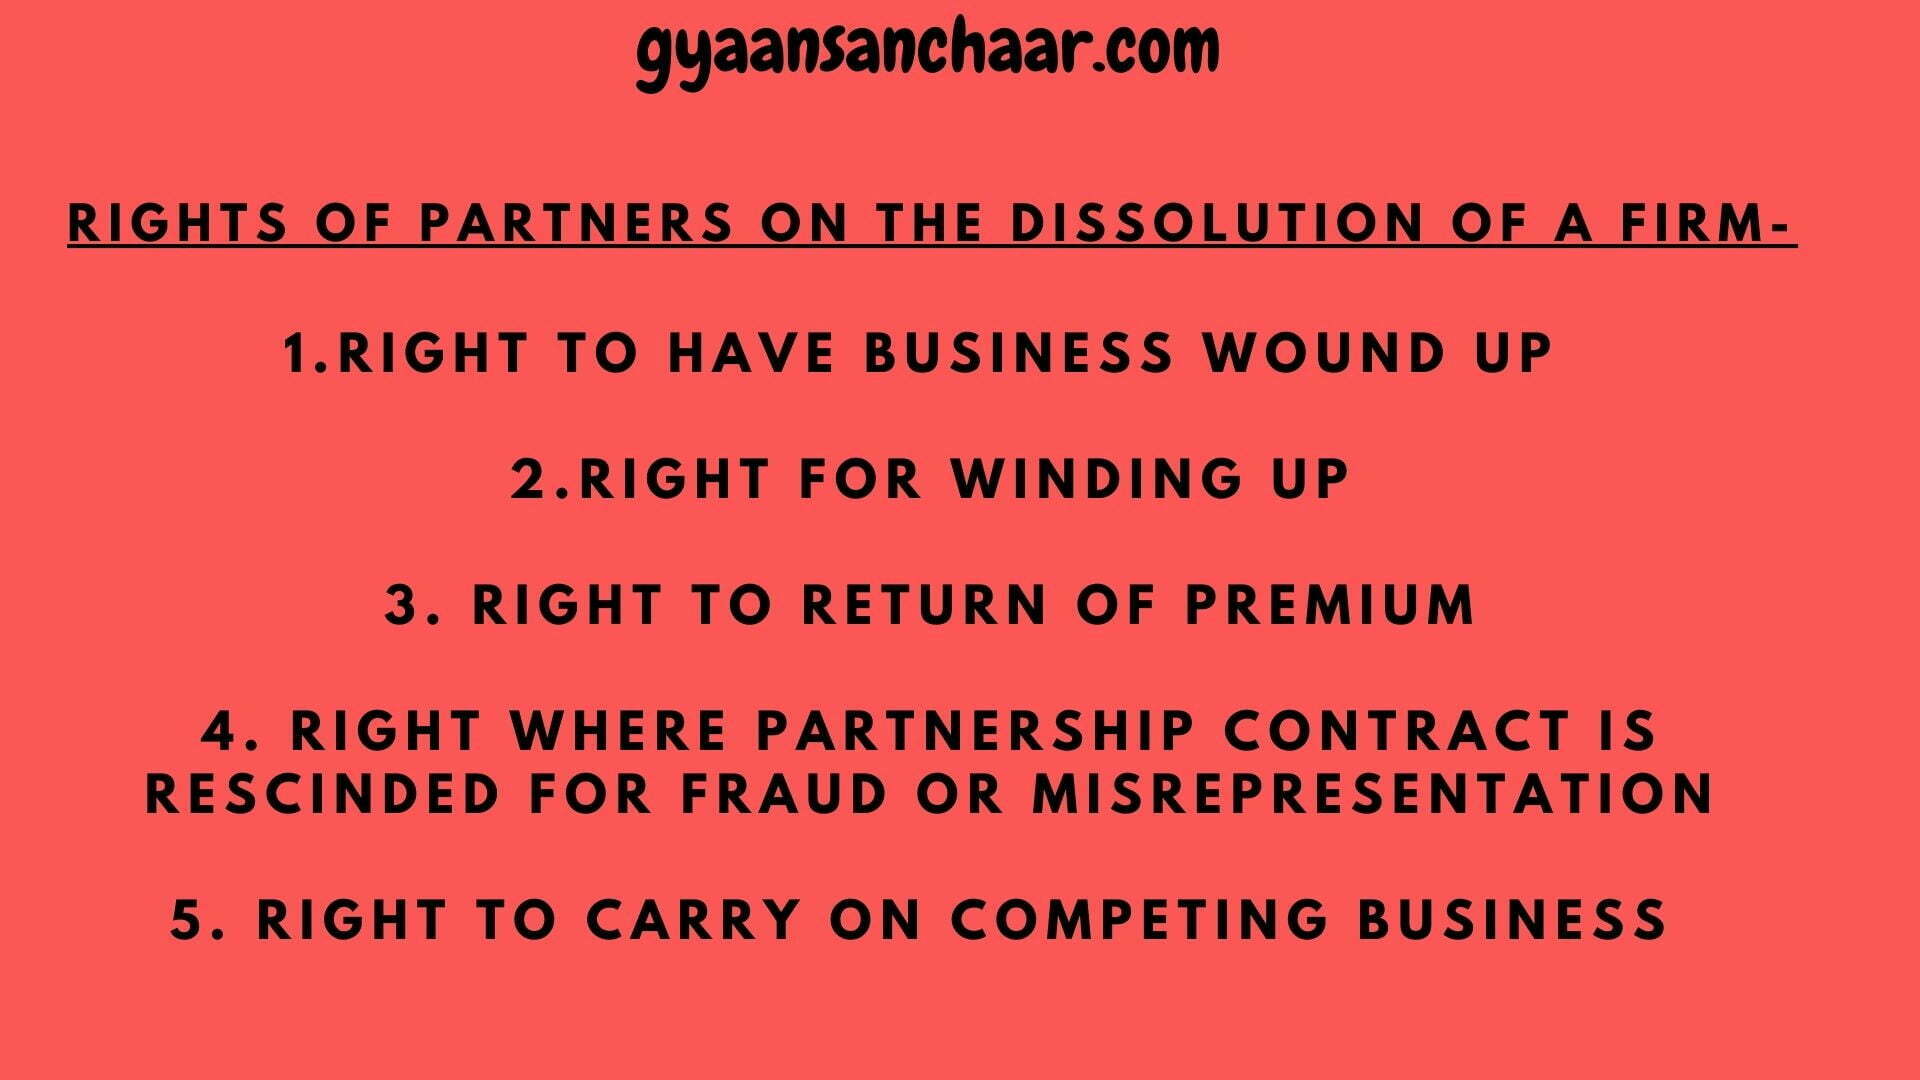 Rights of partners on the dissolution of a firm